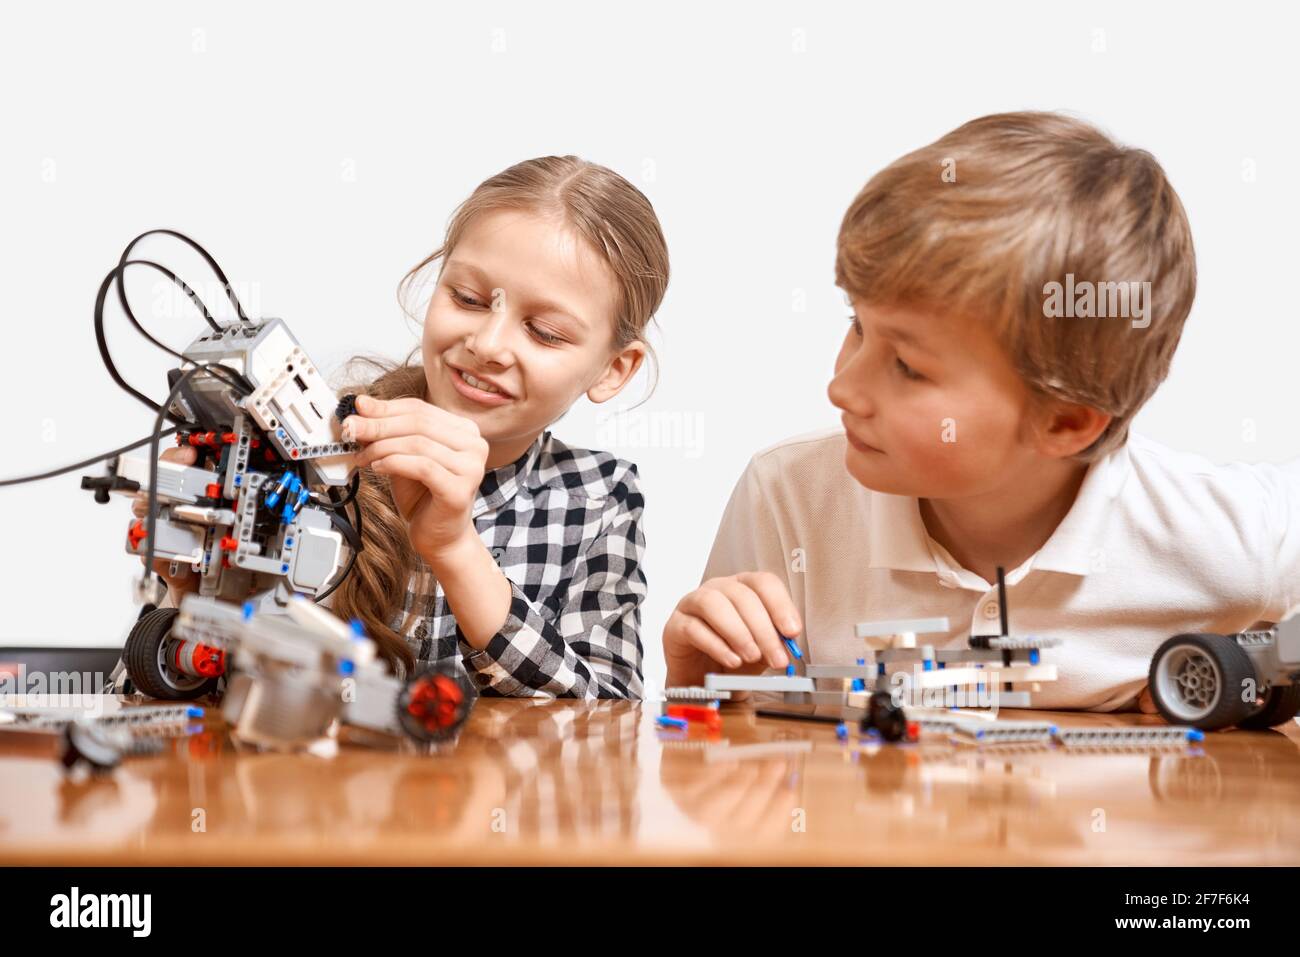 Front view of kids having fun, creating toys. Science engineering. Nice interested friends smiling, chatting, girl showing boy robot made with interesting building kit for kids on table. Stock Photo